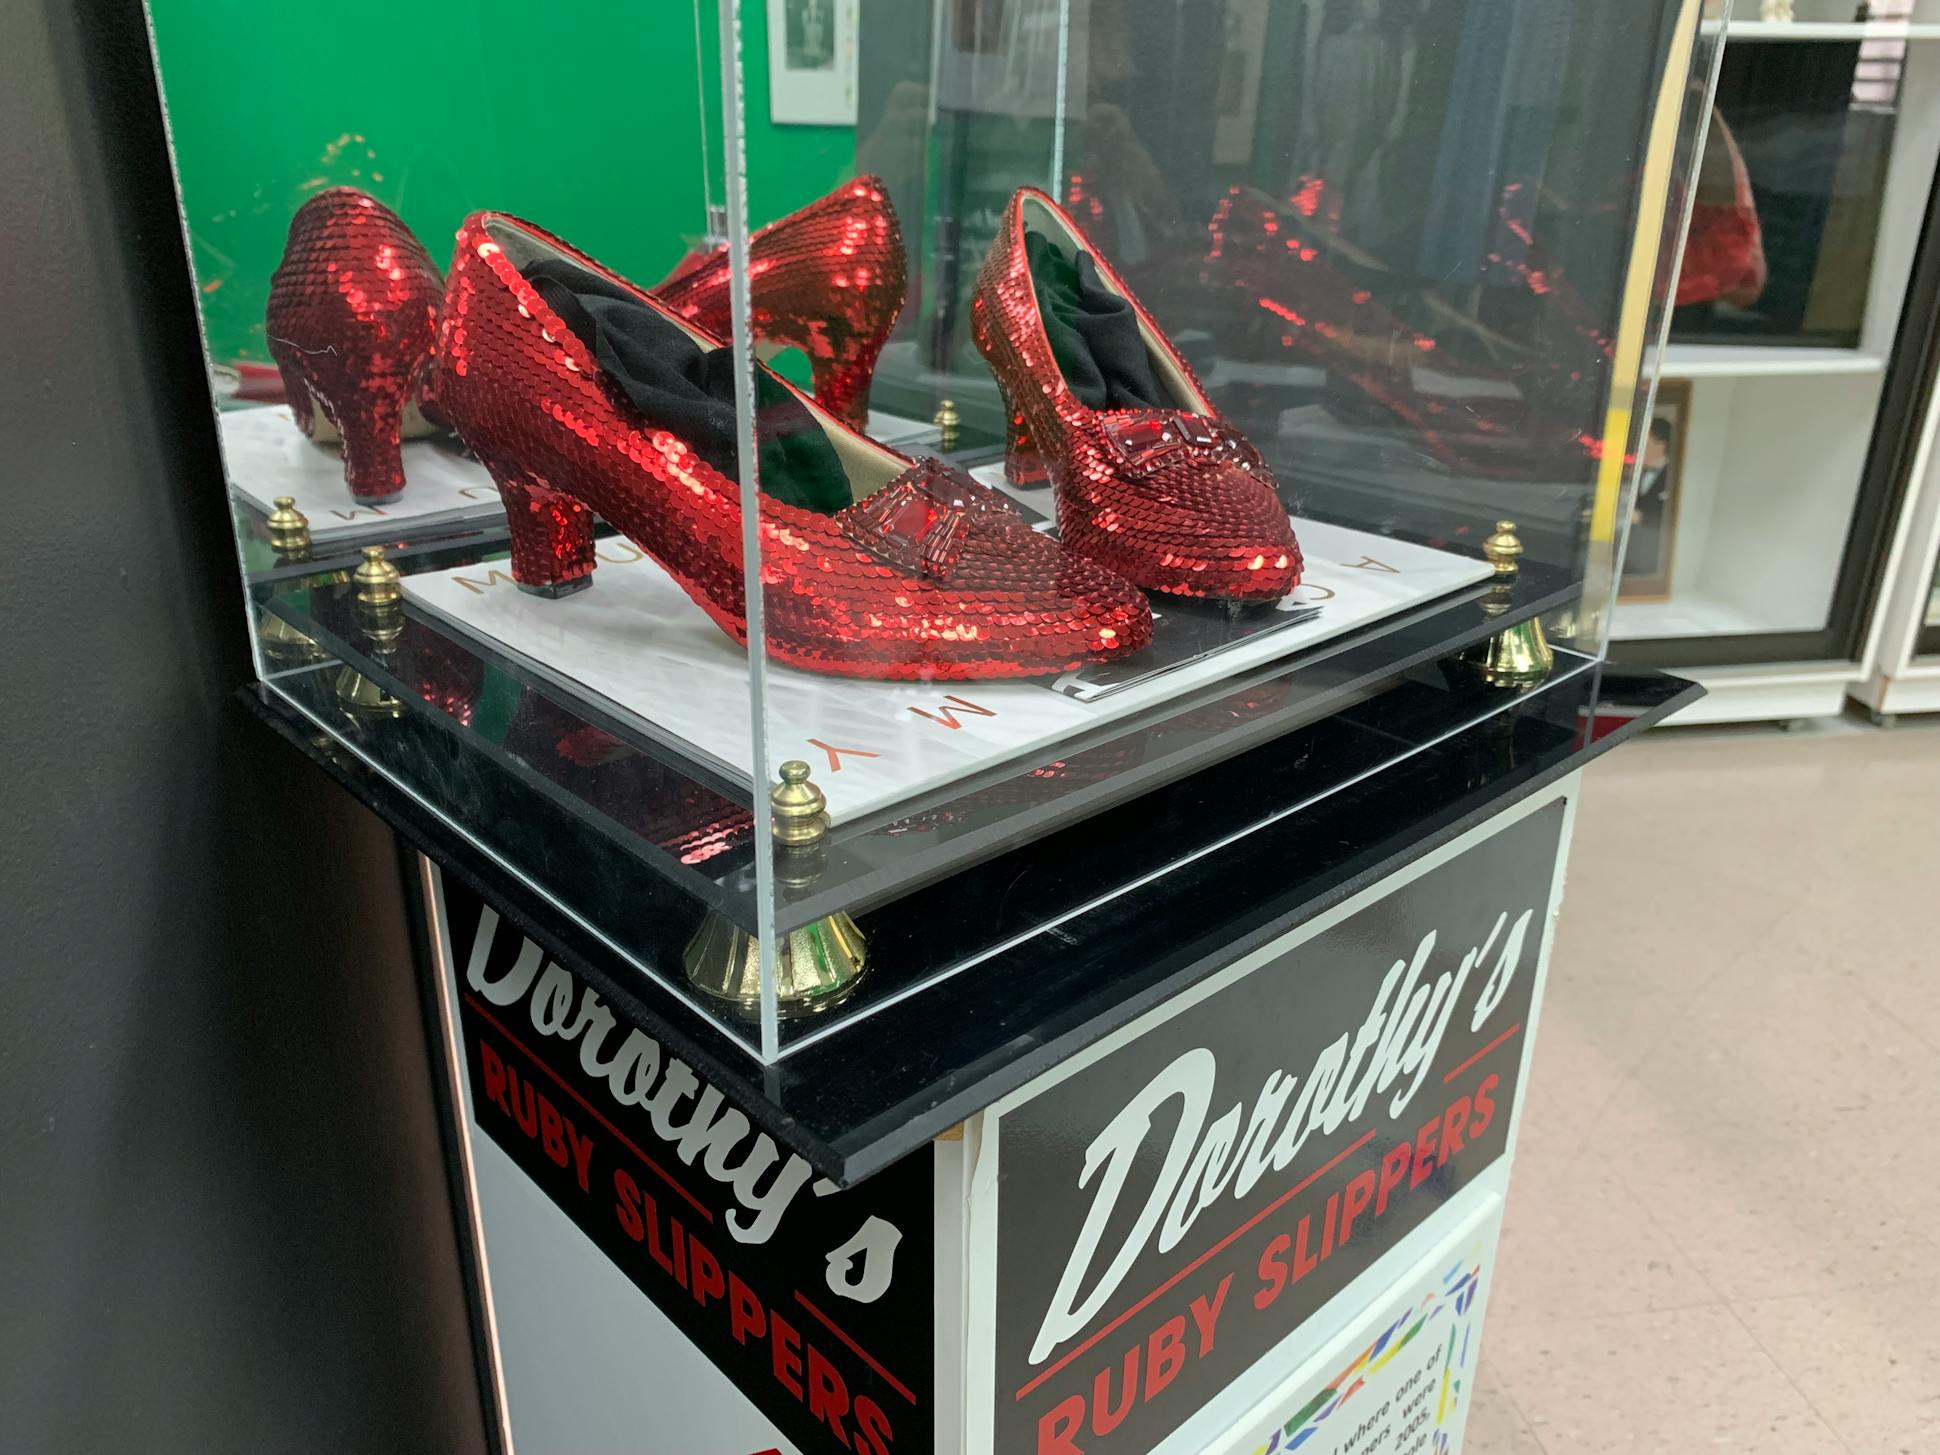 A replica of Dorothy's ruby slippers from “The Wizard of Oz” on display at the Judy Garland Museum in Grand Rapids, Minn.